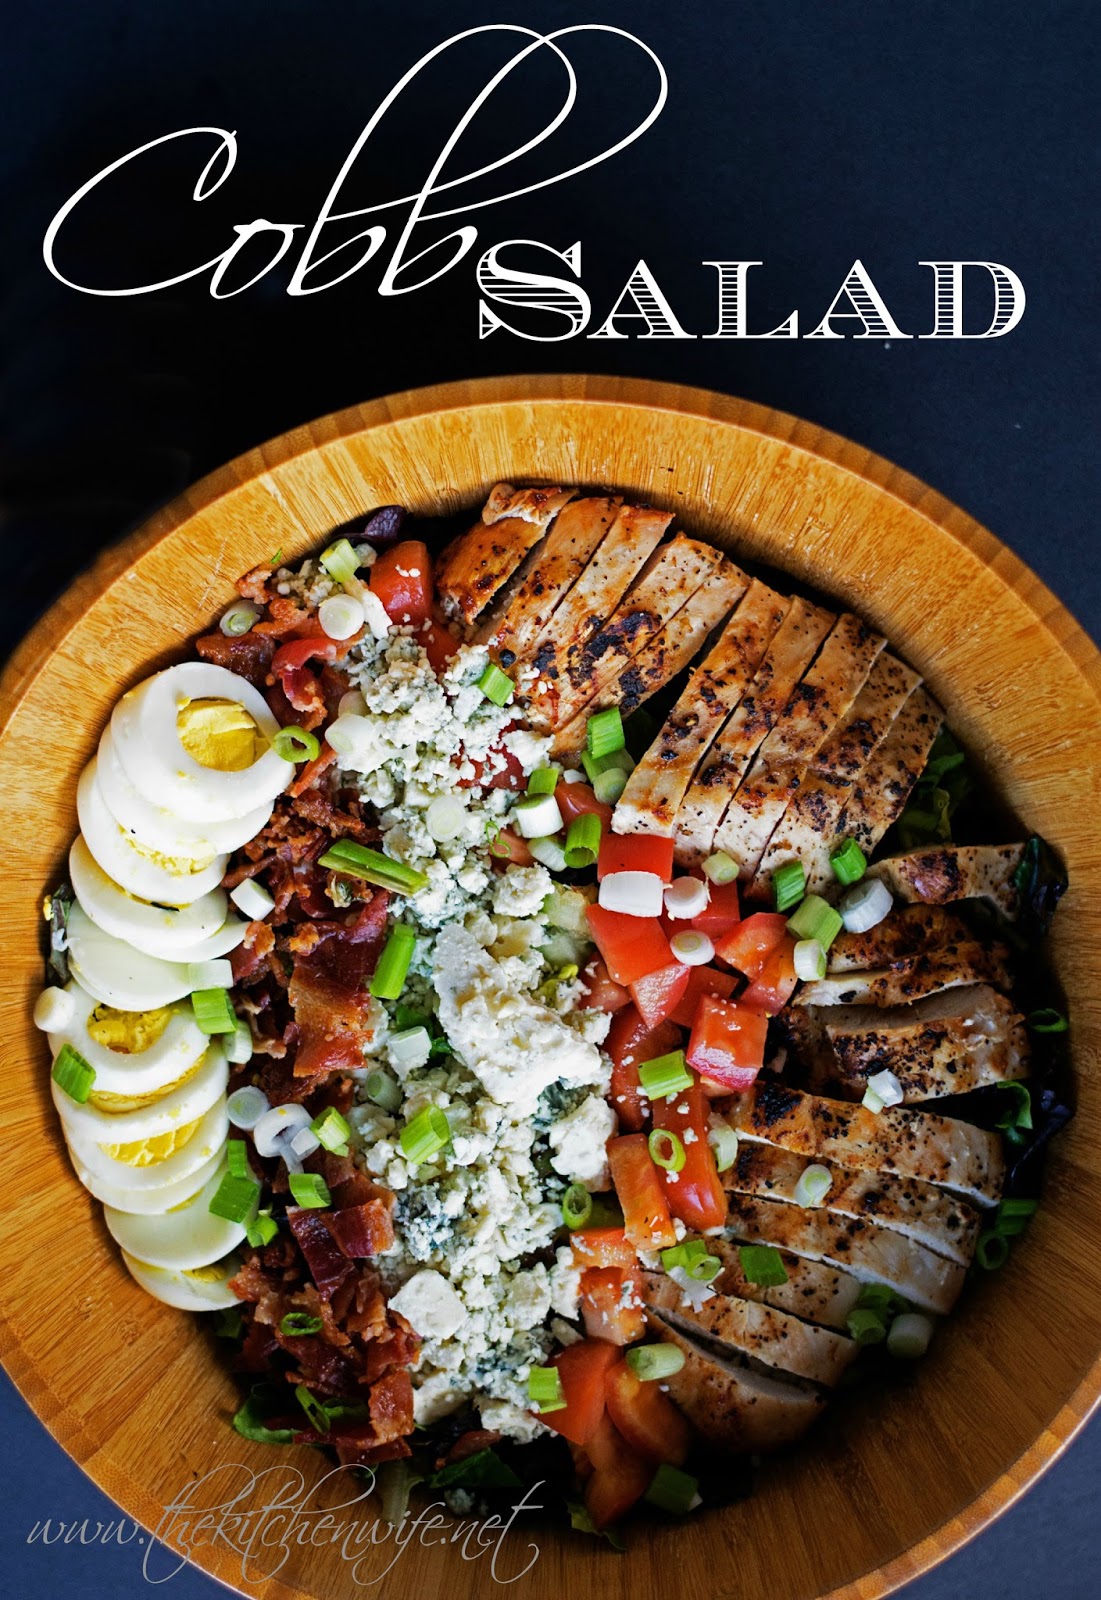 Recipe for Cobb Salad - The Kitchen Wife